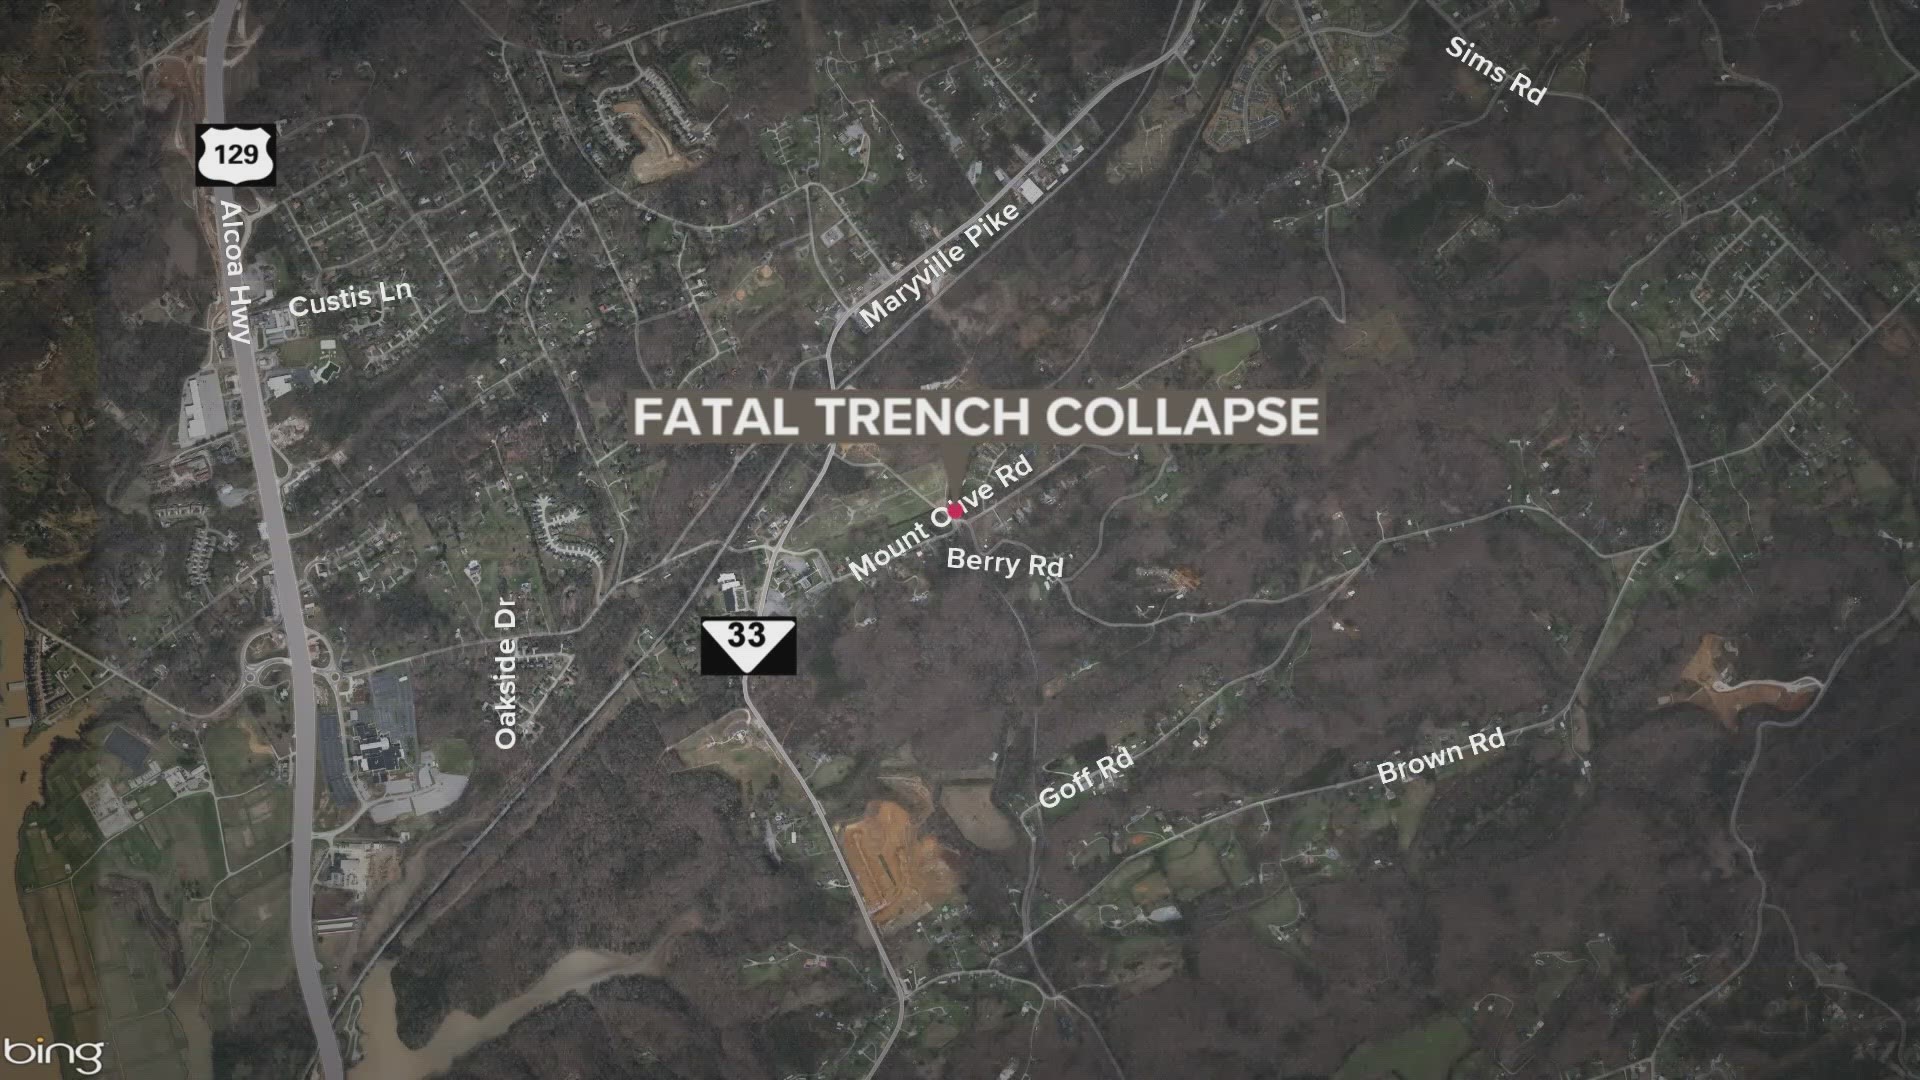 On July 10, a deep trench collapsed and killed a worker in South Knoxville who was helping replace a sewer line.